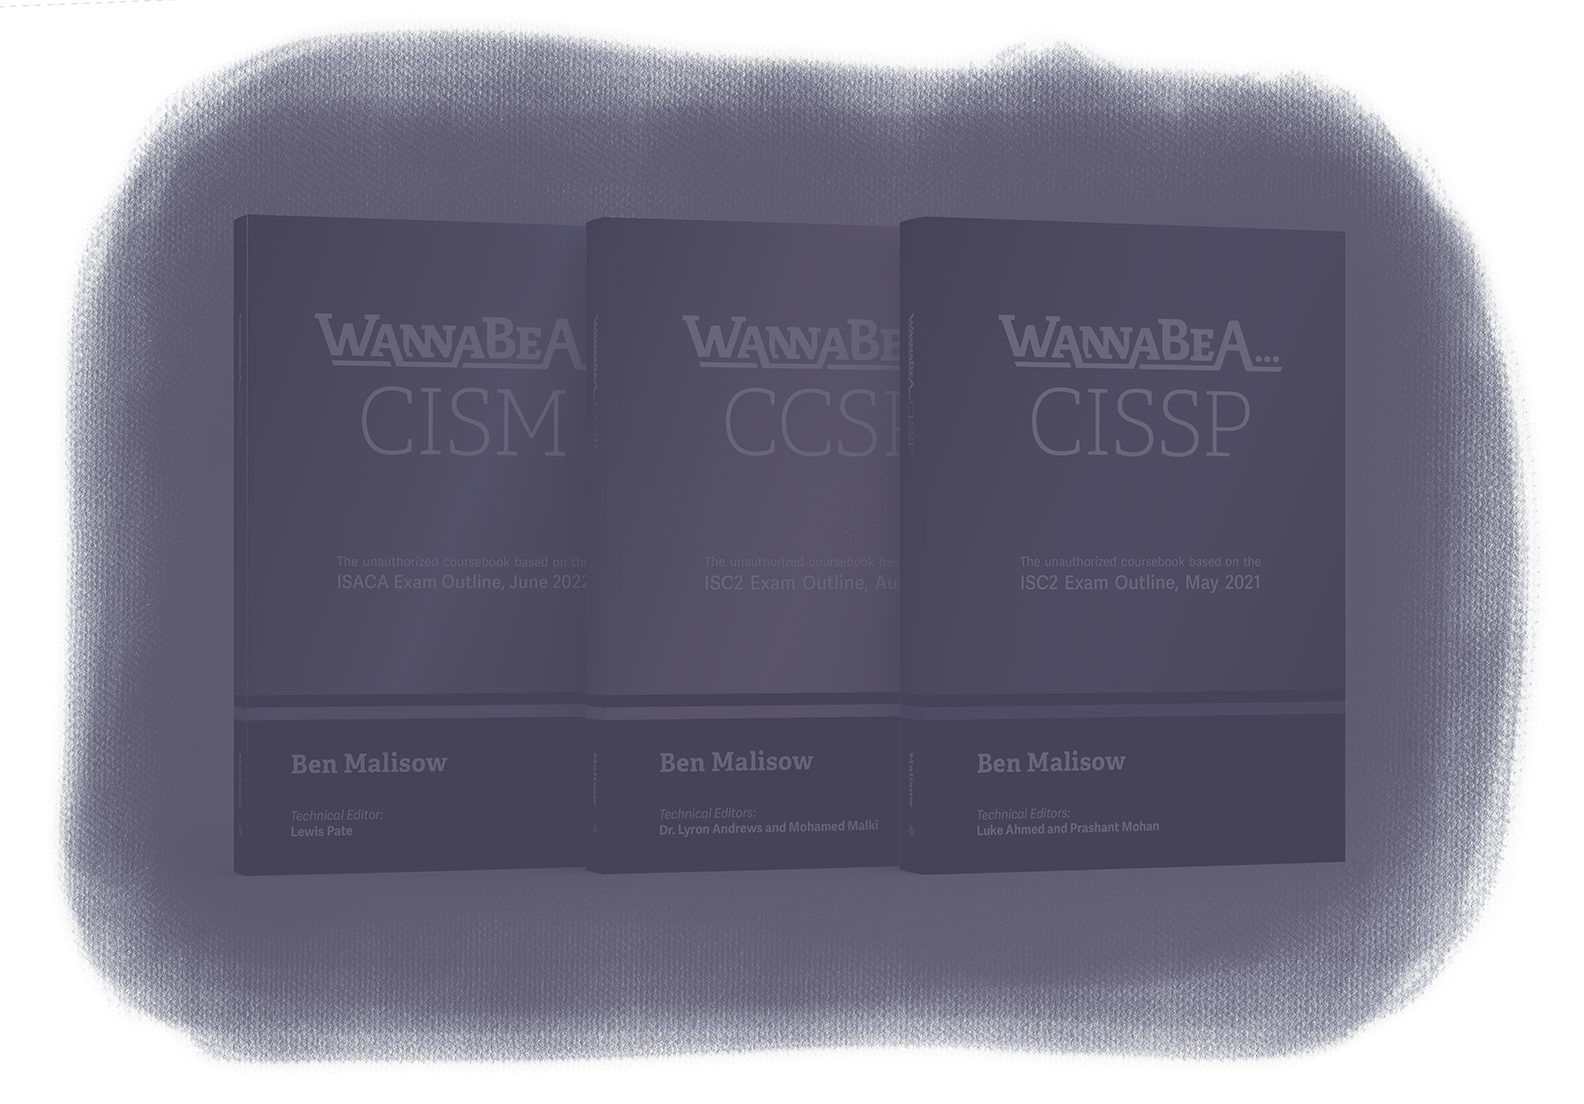 WannaBeA book covers by Securityzed